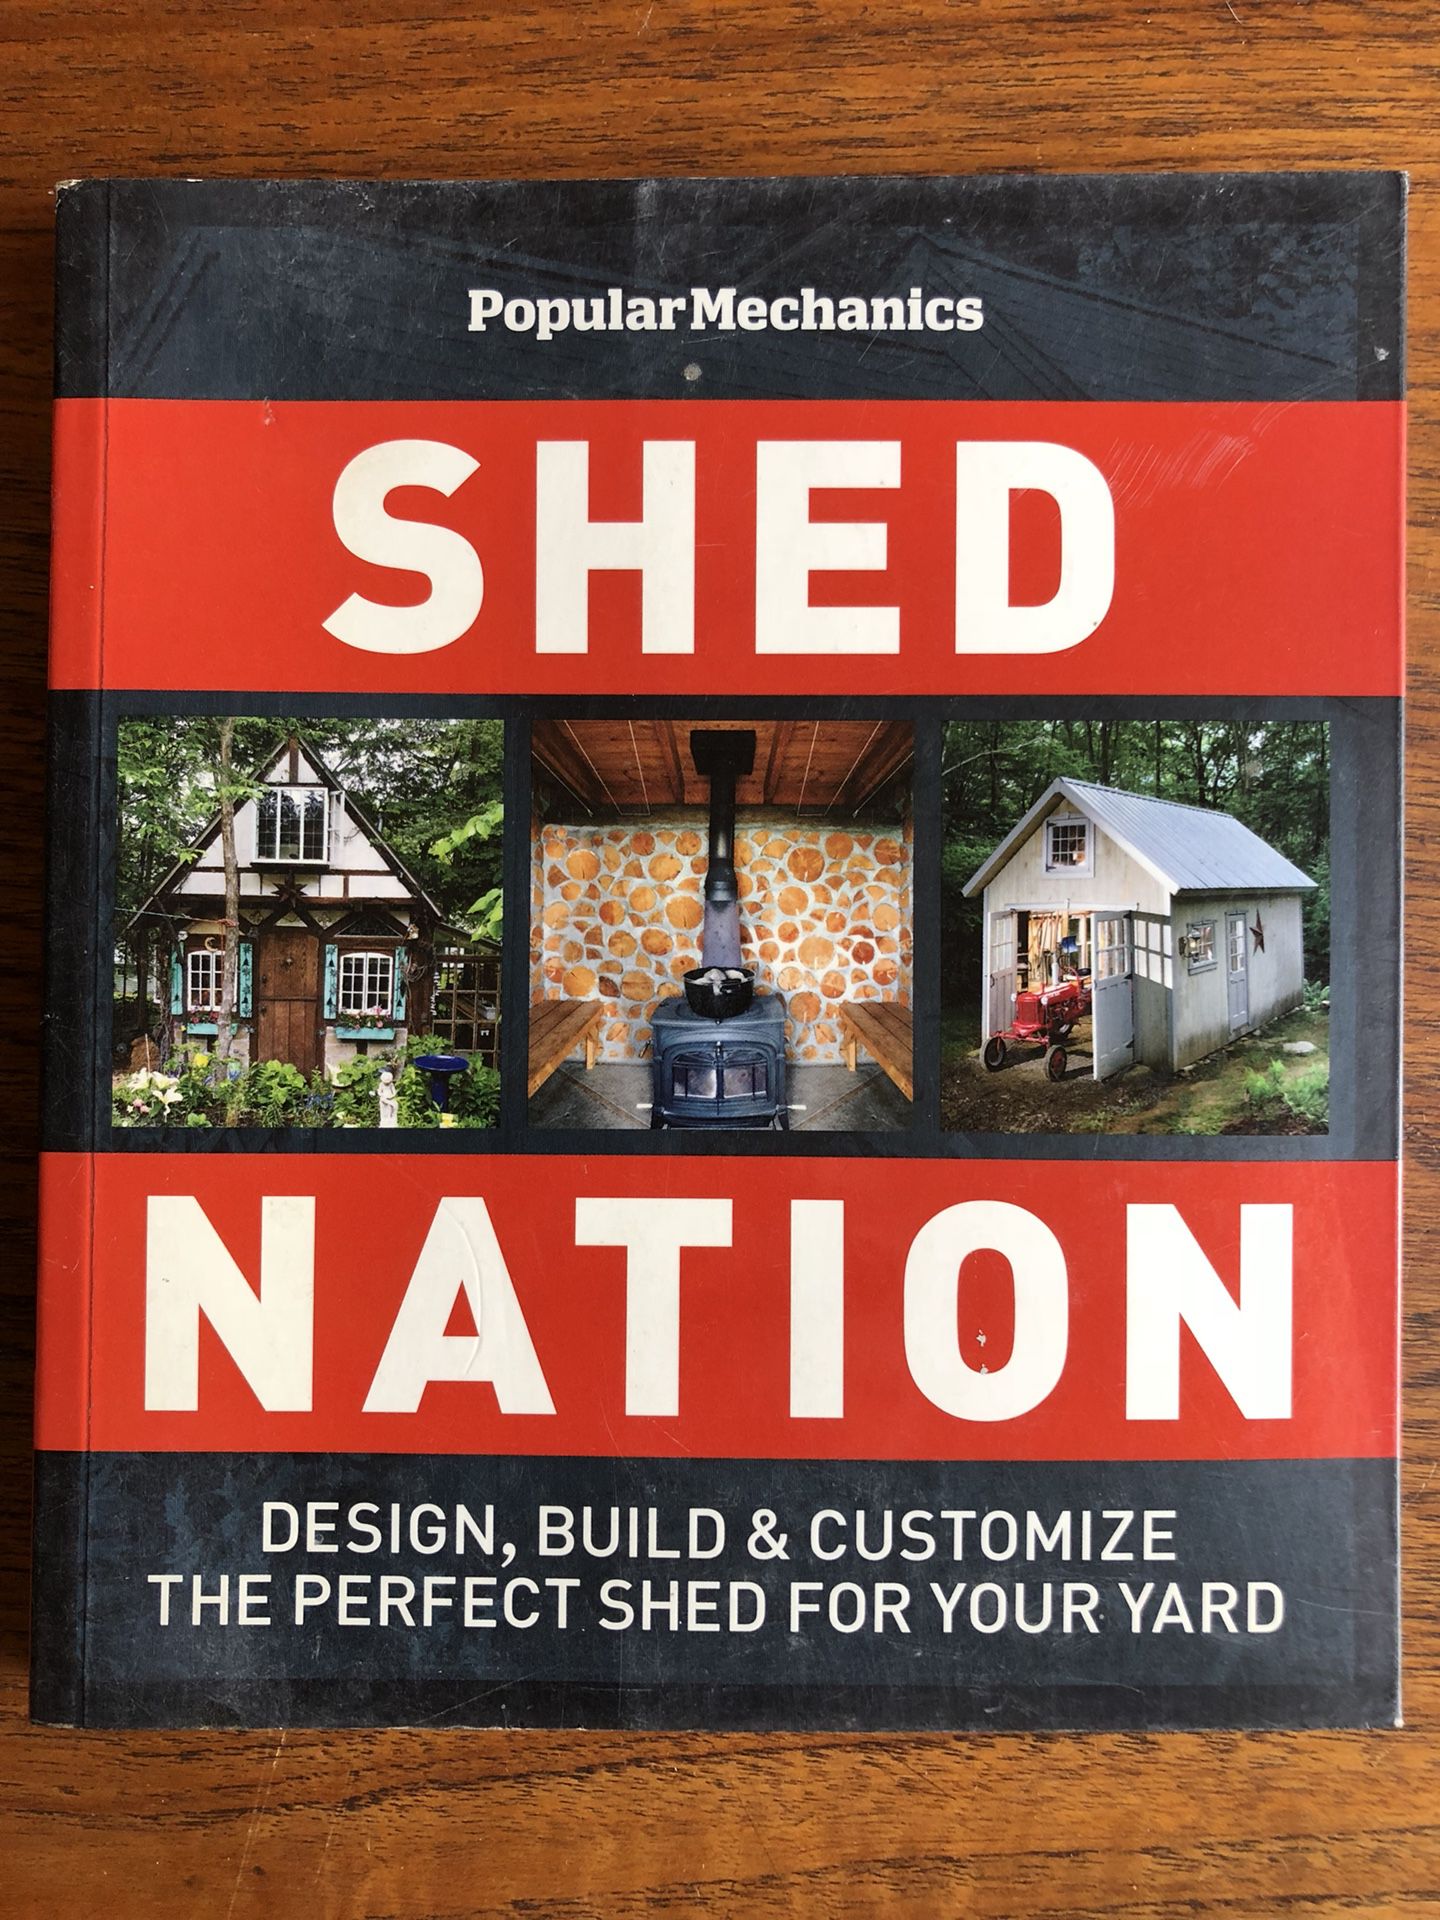 Shed building book